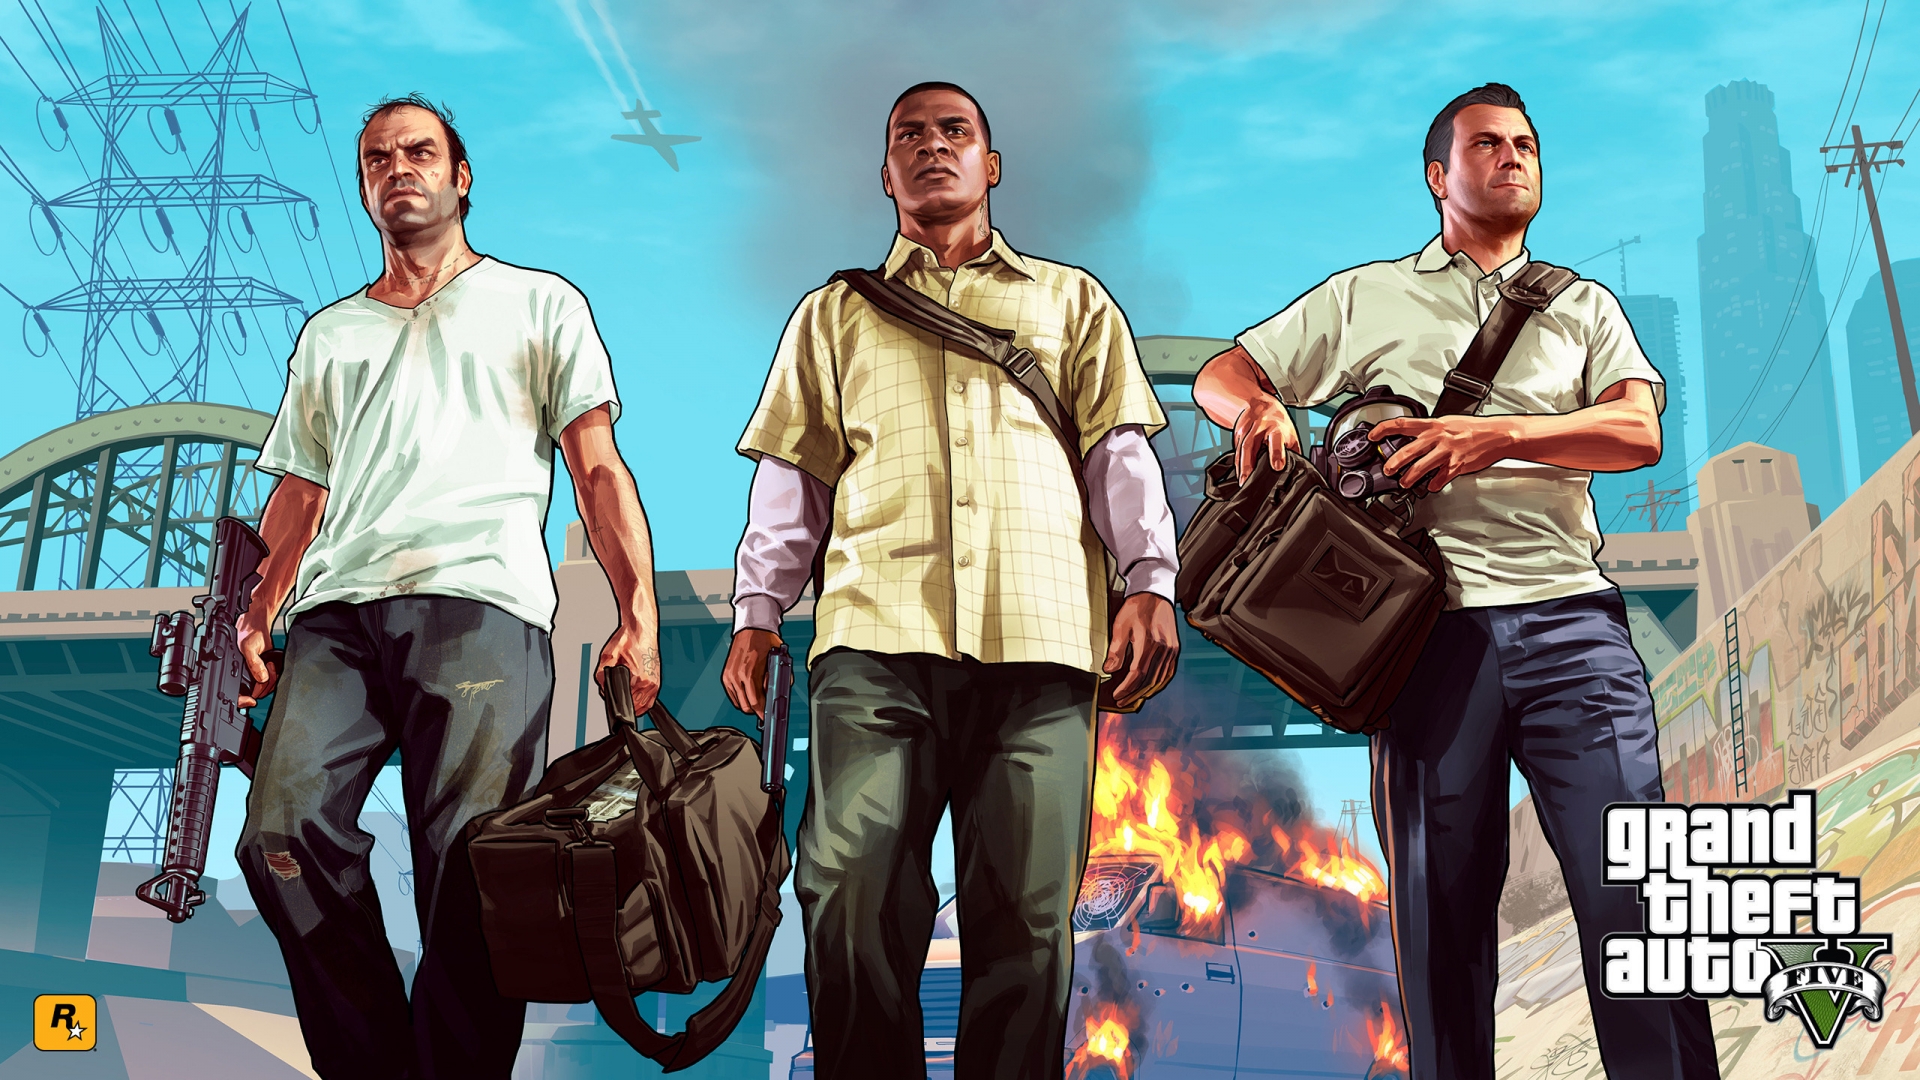 Gta 5 Main Characters for 1920 x 1080 HDTV 1080p resolution